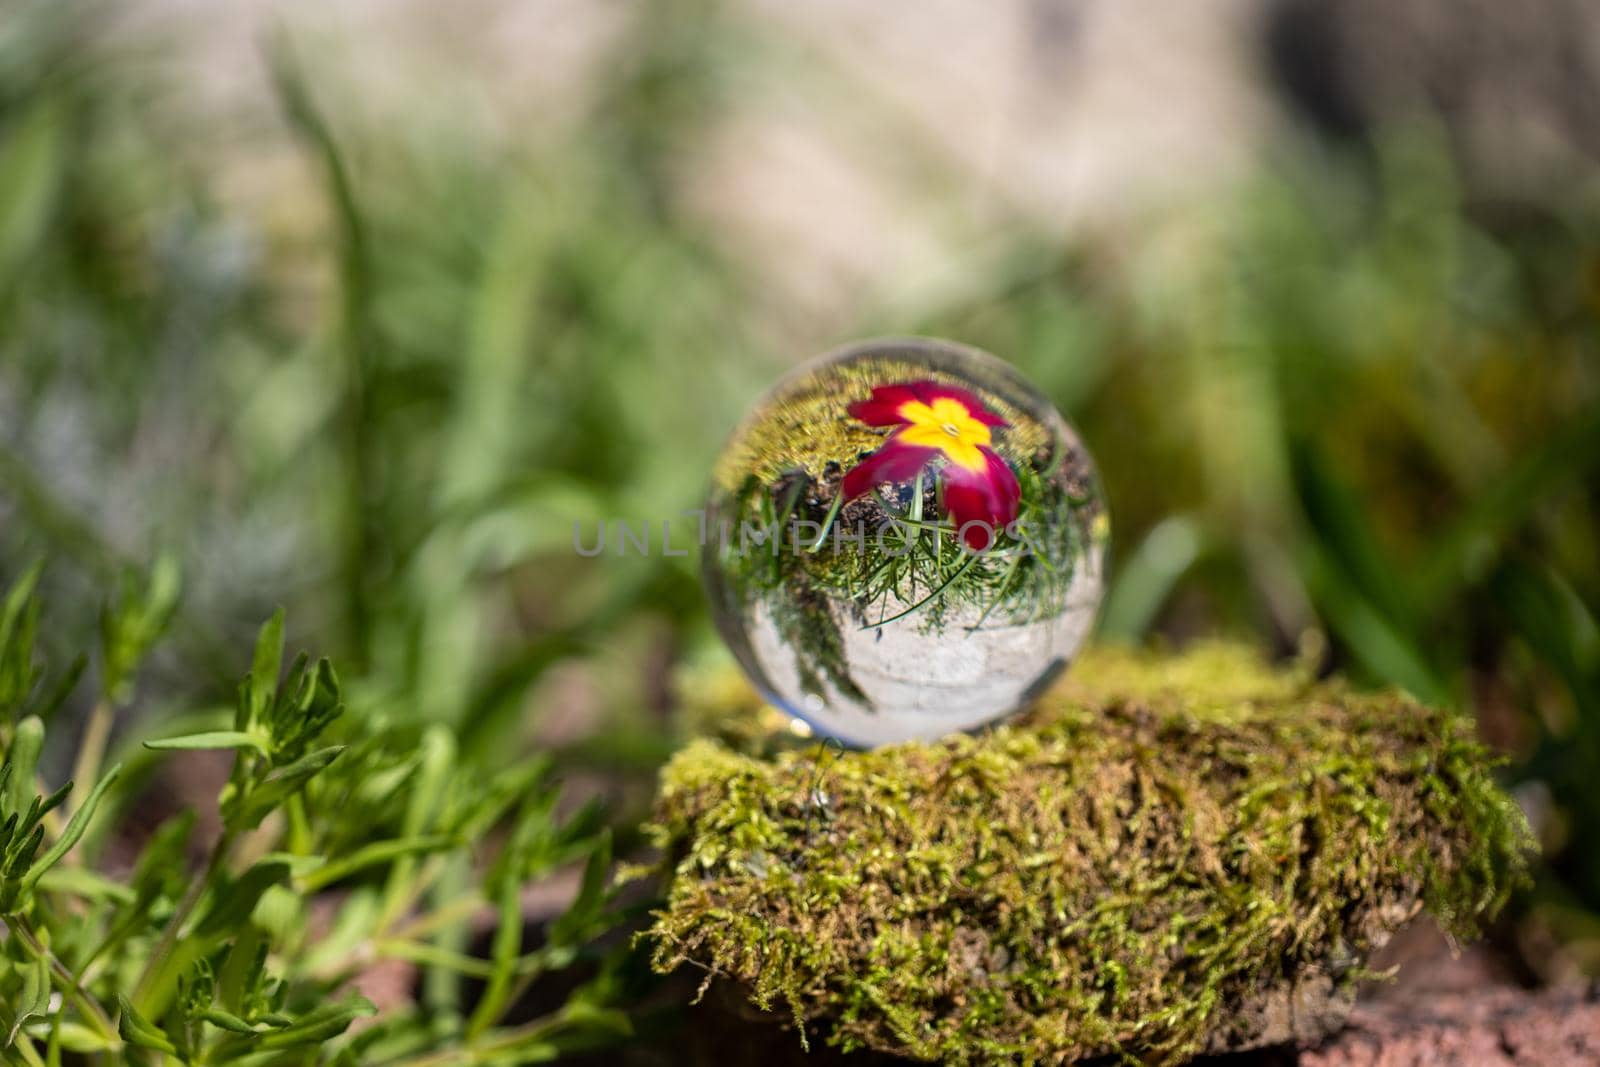 Crystal ball with red primrose blossom on moss covered stone surrounded by green grass